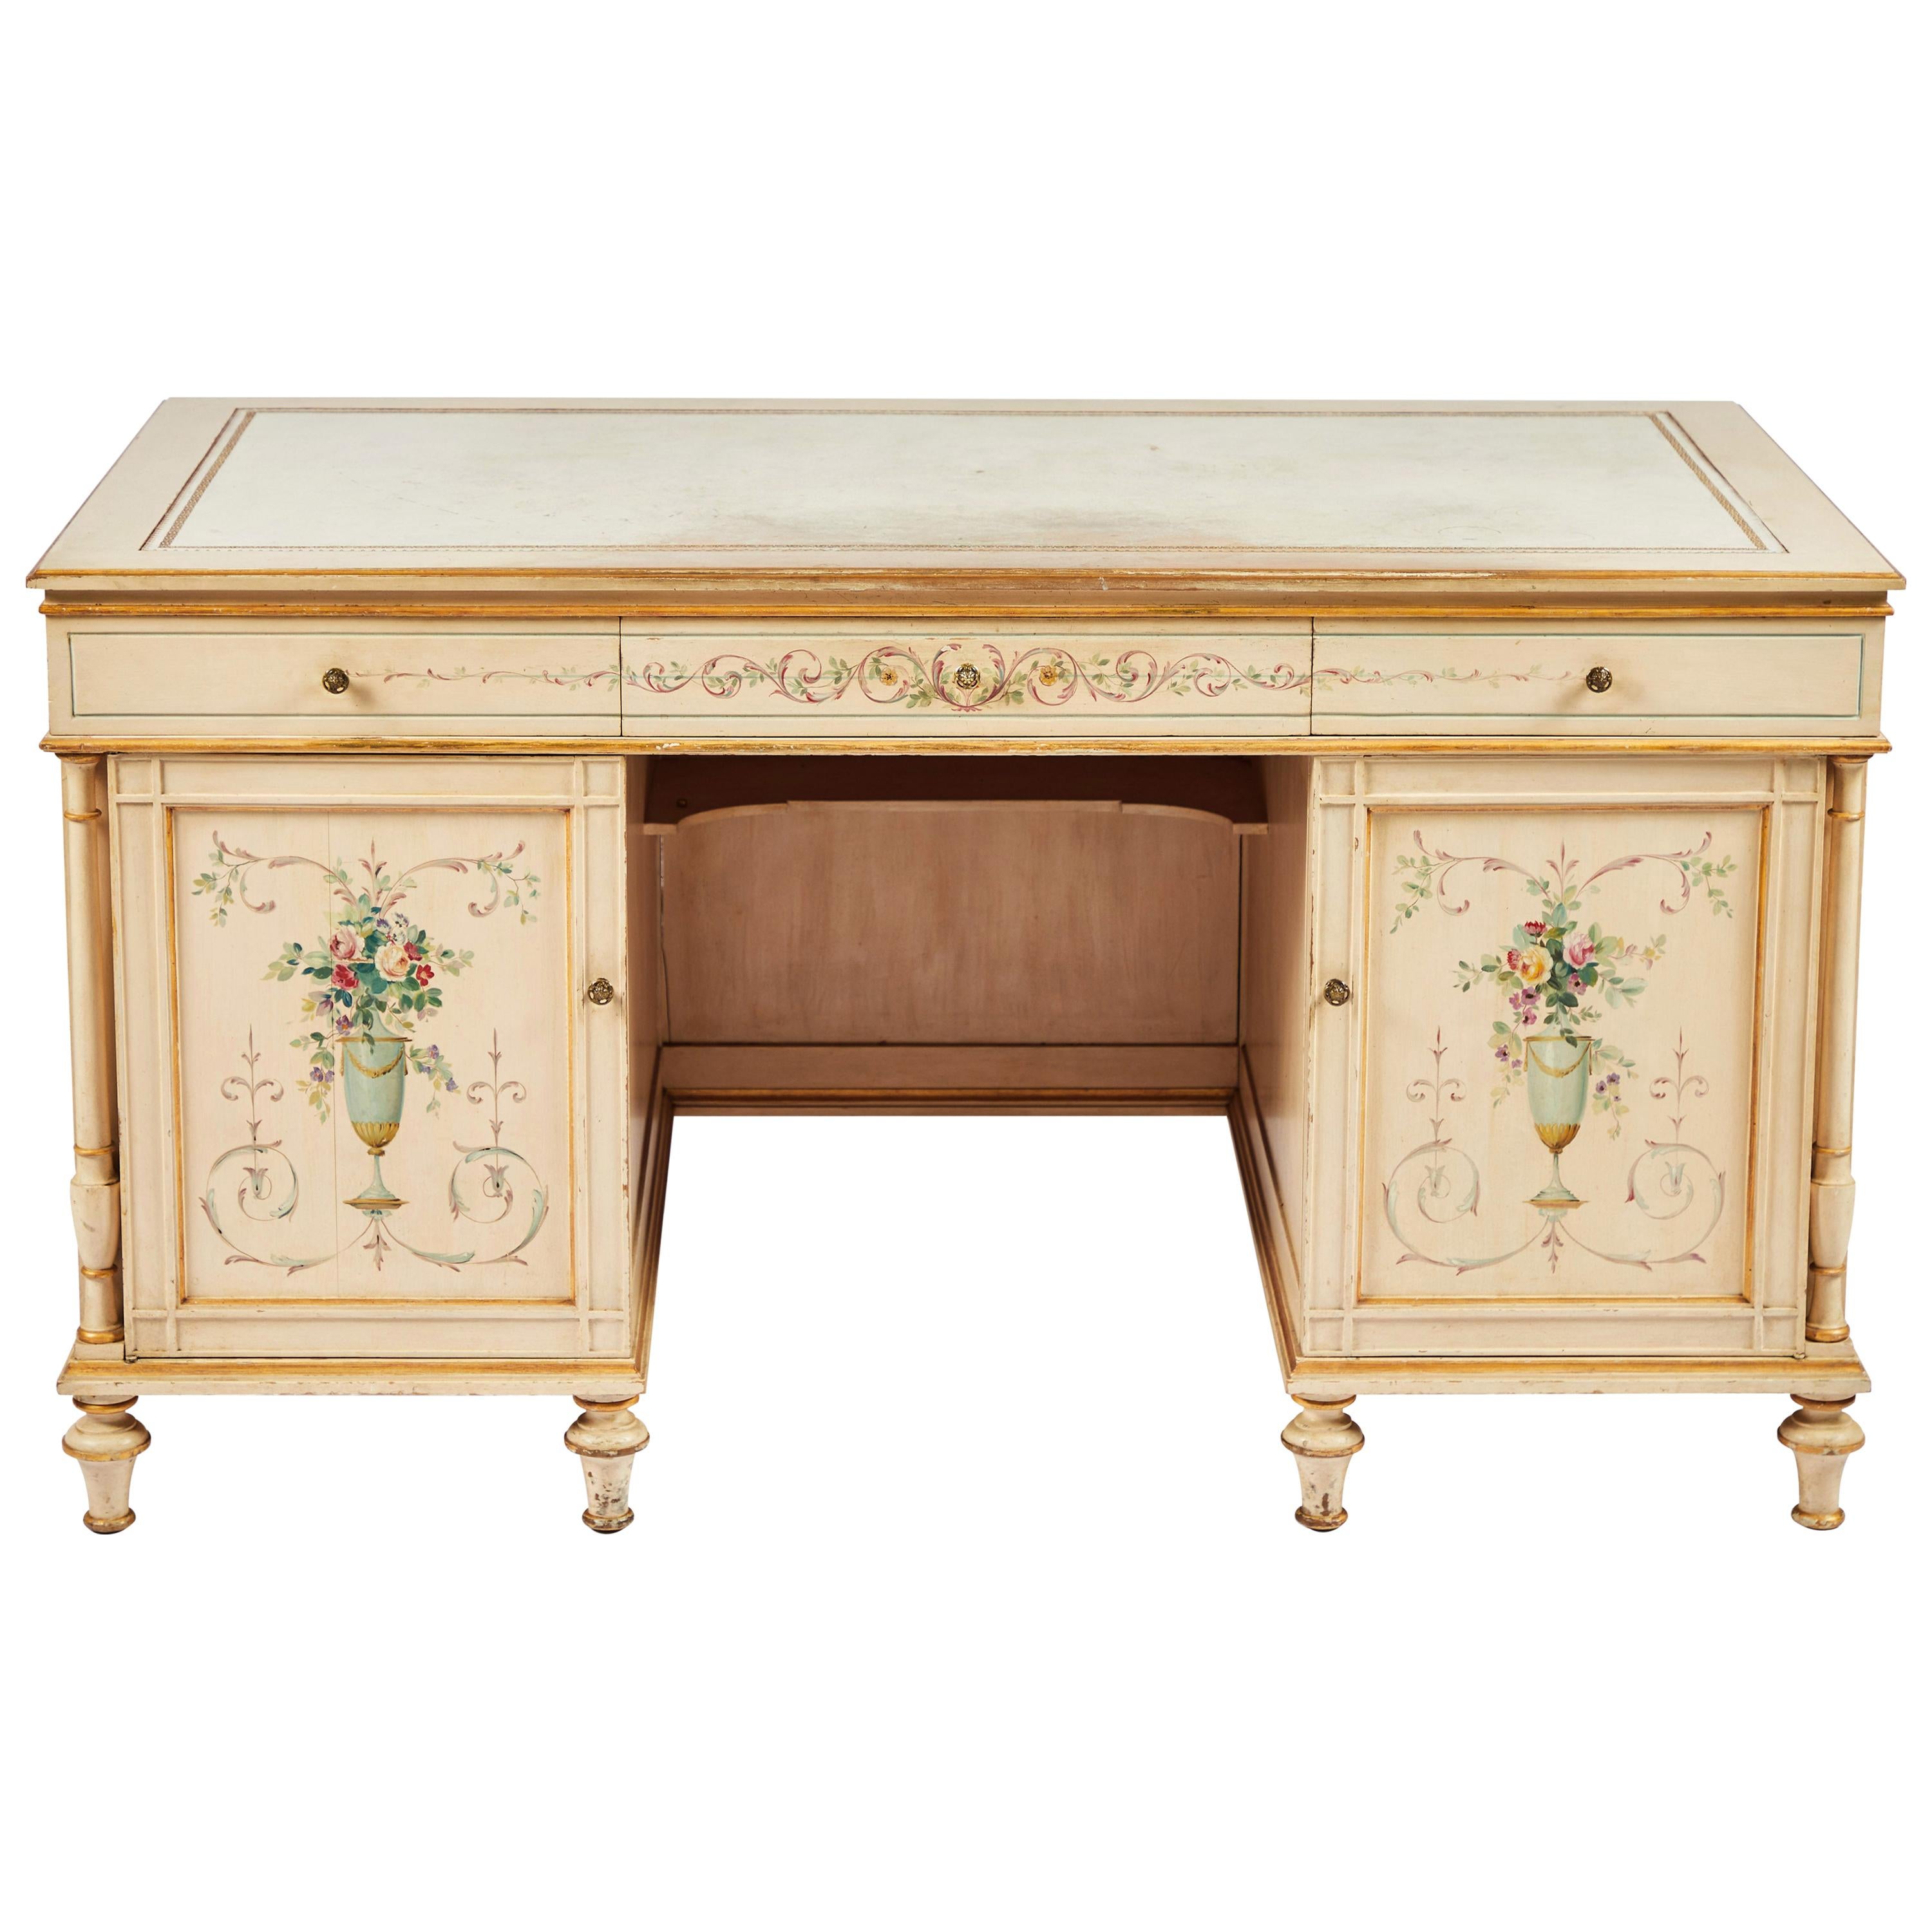 1930s Hand Painted Desk in the Continental Style